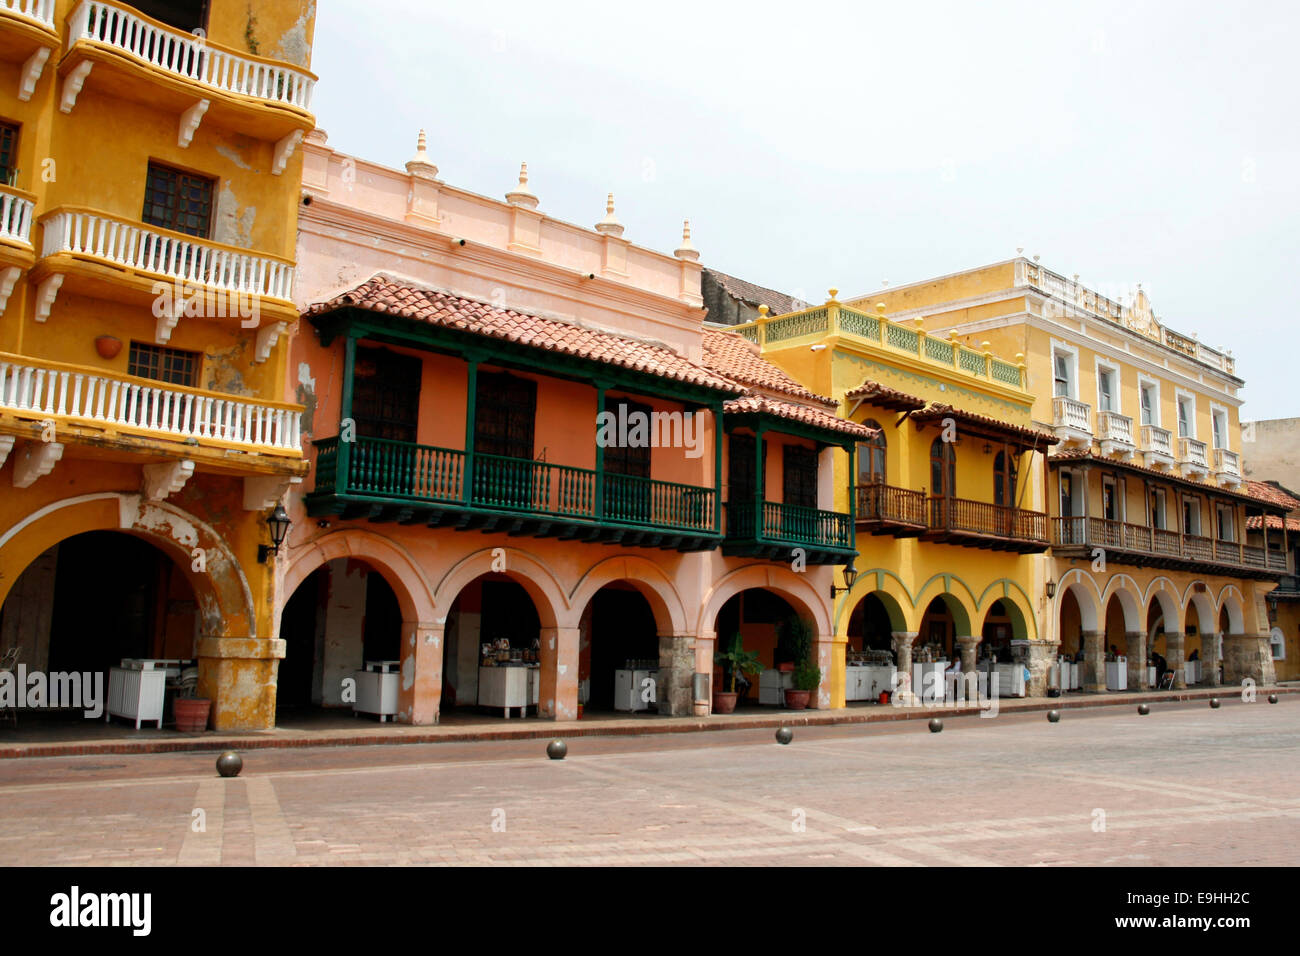 Brightly coloured buildings on a square in Cartagena, Colombia Stock Photo